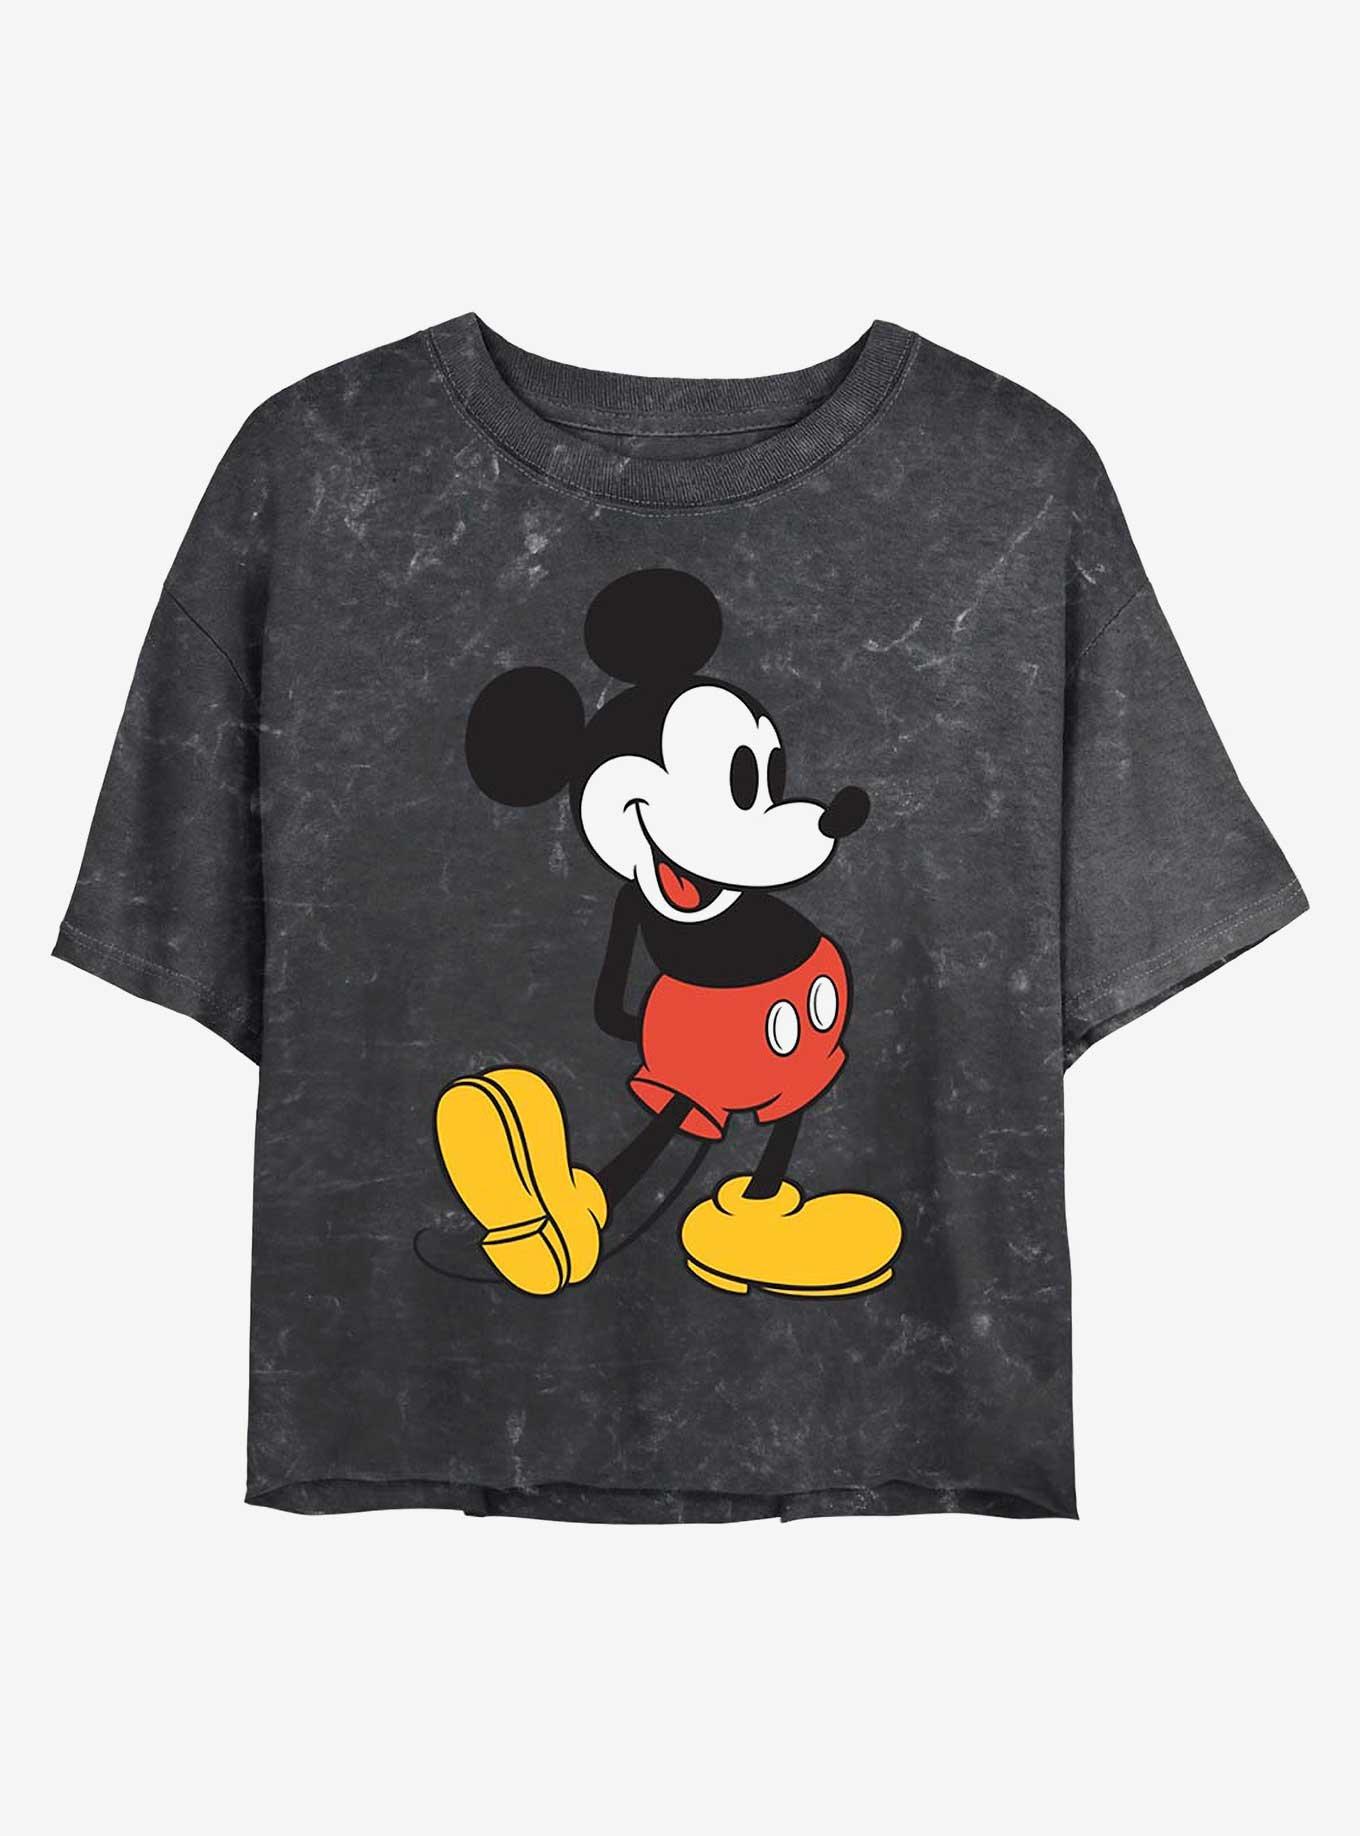 Disney Mickey Mouse Classic Mickey Mineral Wash Crop Girls T-Shirt, BLACK, hi-res